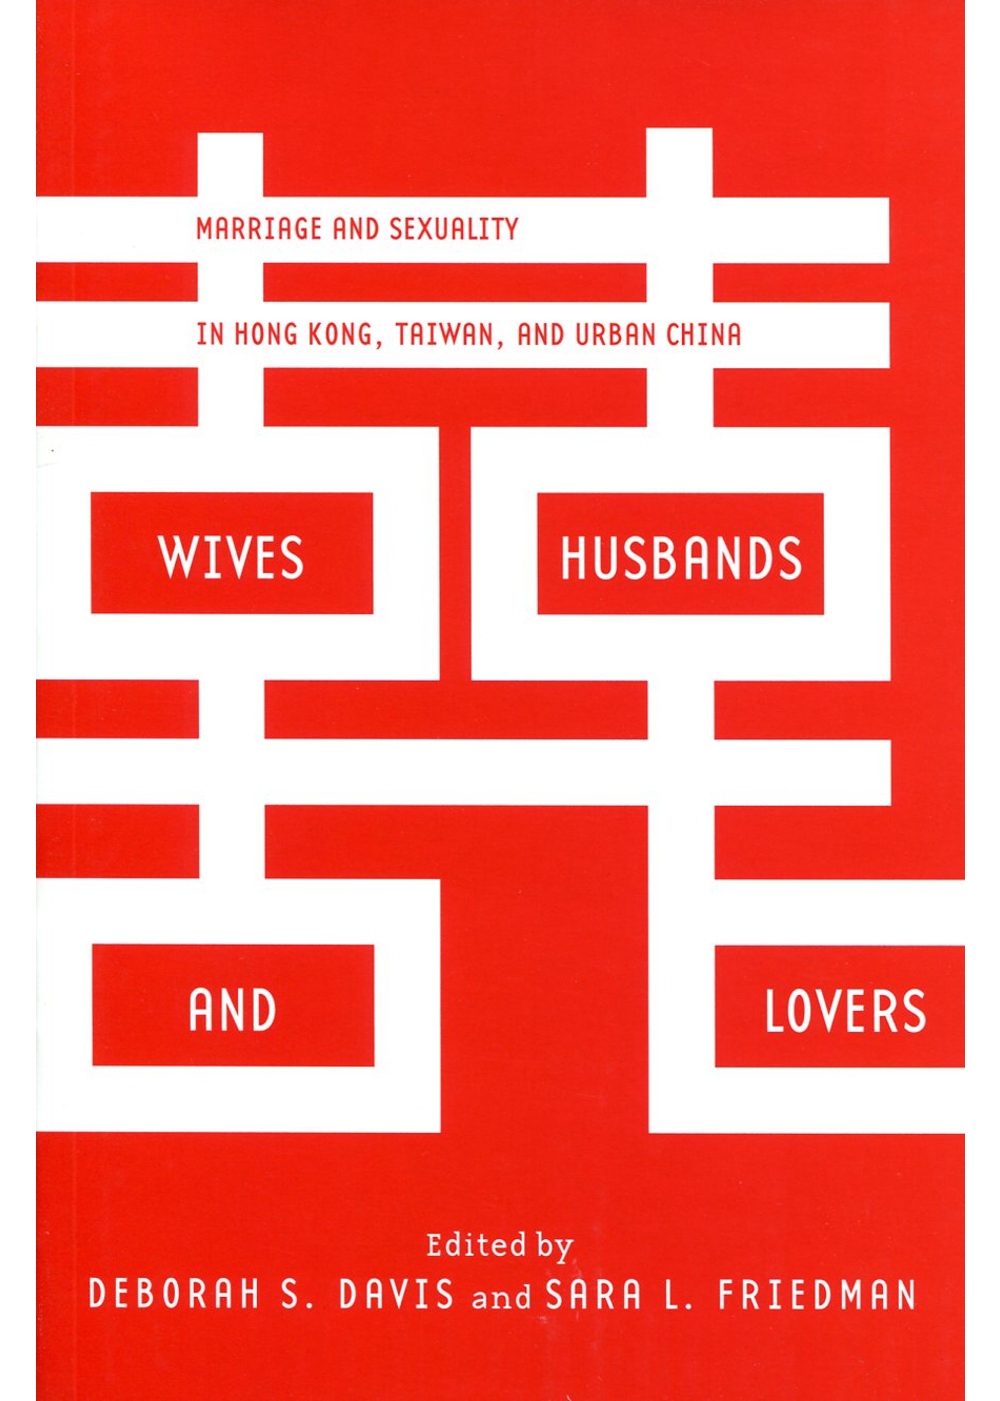 Wives, Husbands, and Lovers：Marriage and Sexuality in Hong Kong, Taiwan, and Urban China